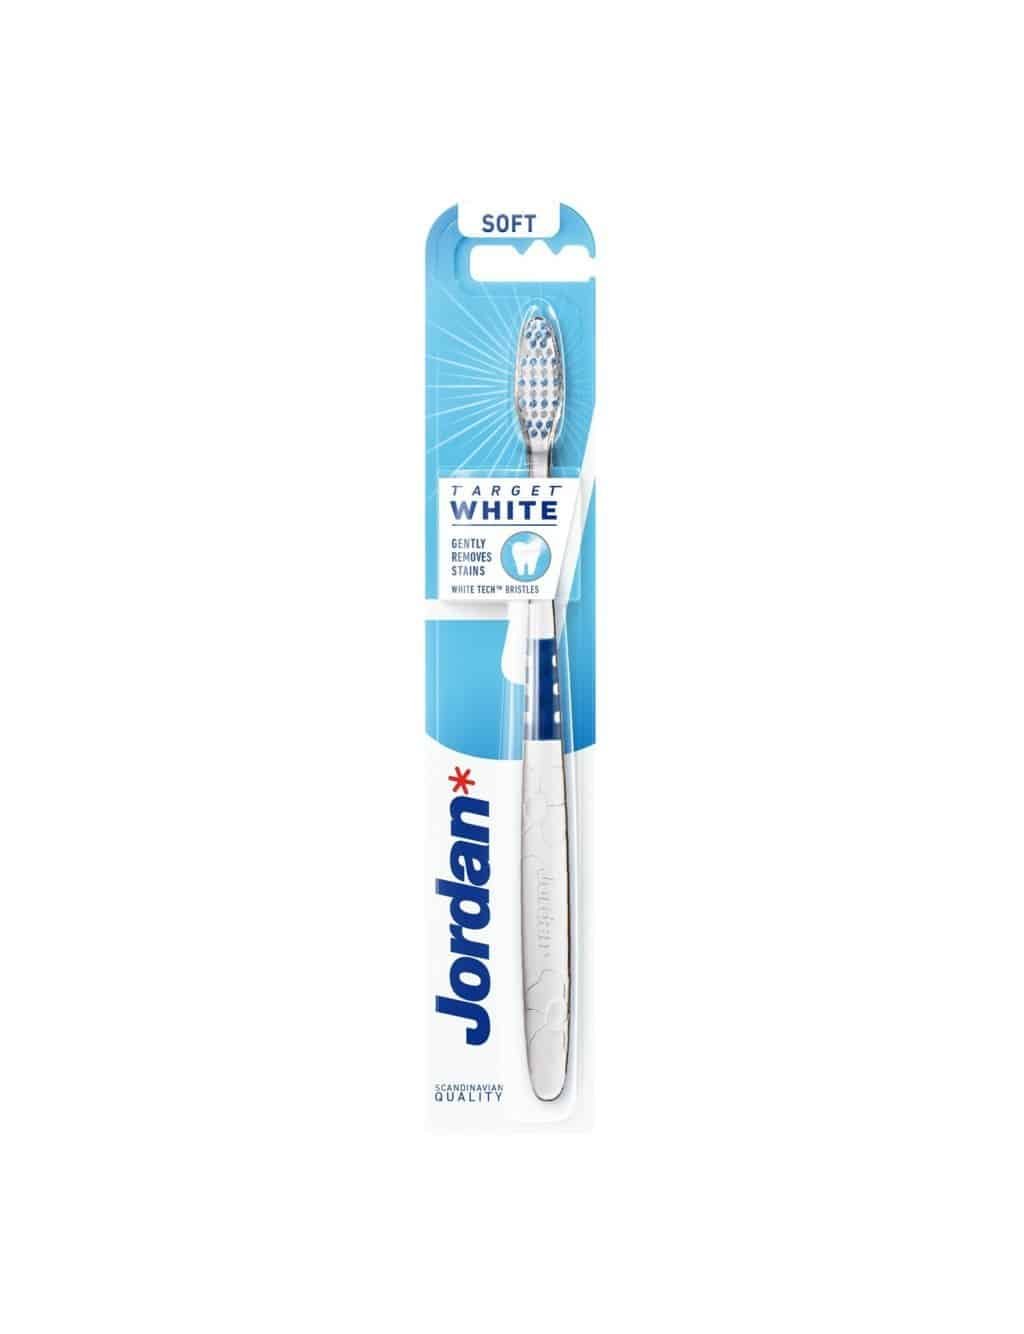 Jordan Target White Toothbrush Soft With Whitetech Technology ( Assorted Color )